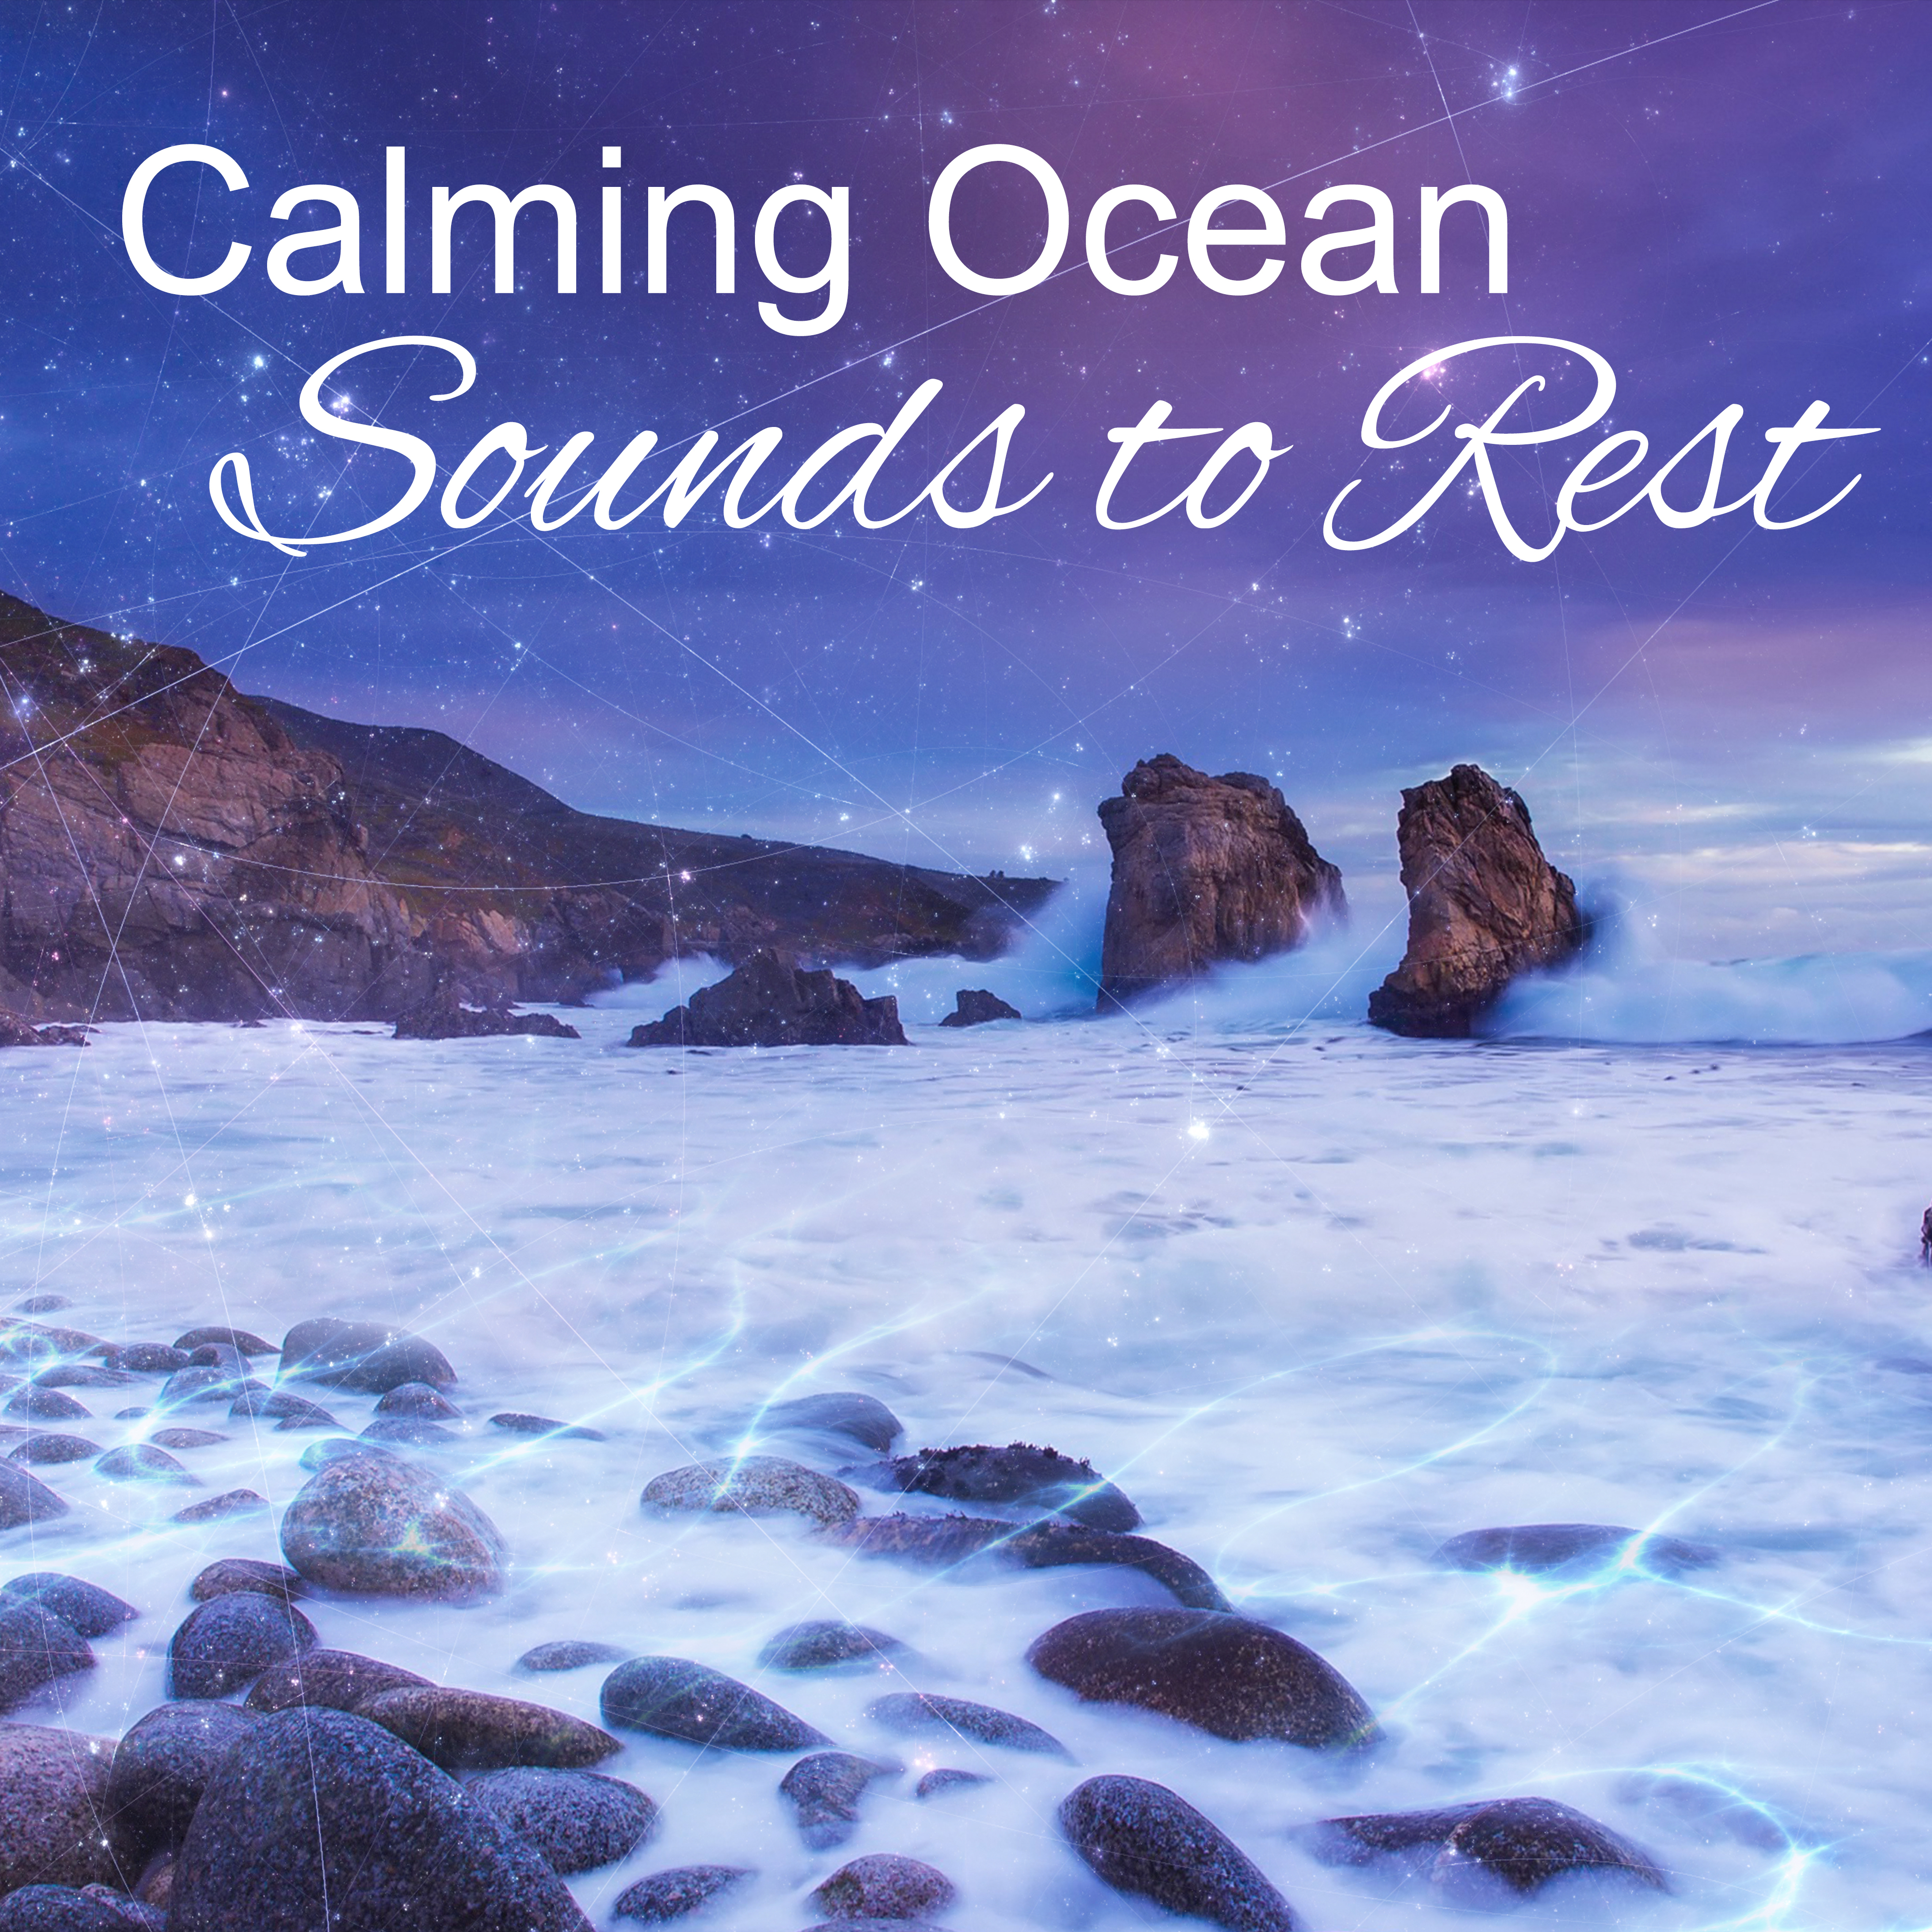 Calming Ocean Sounds to Rest – Soothing Water Waves, Waterfall, New Age Calmness, Stress Relief